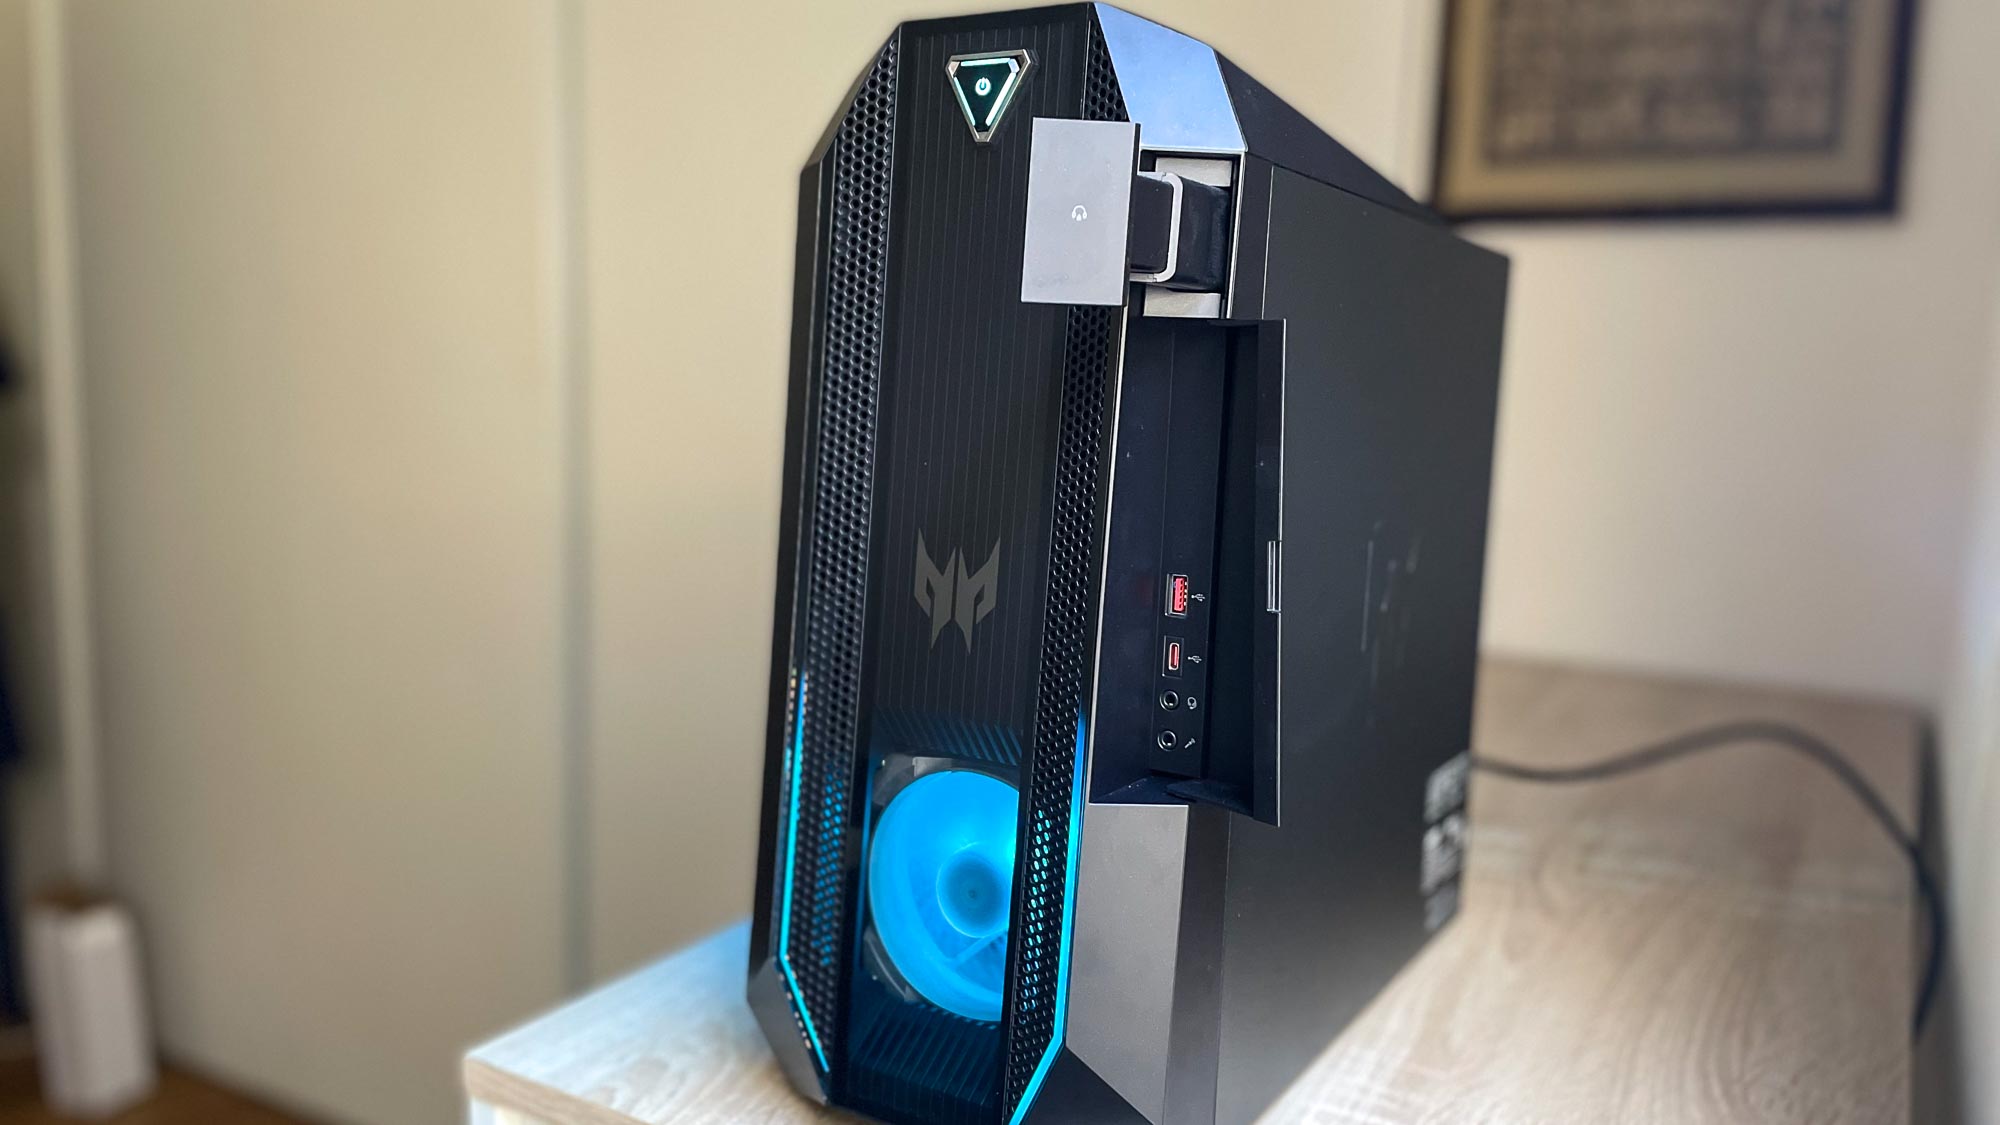 Acer Predator Orion 3000 viewed front on, with front panel open showing ports